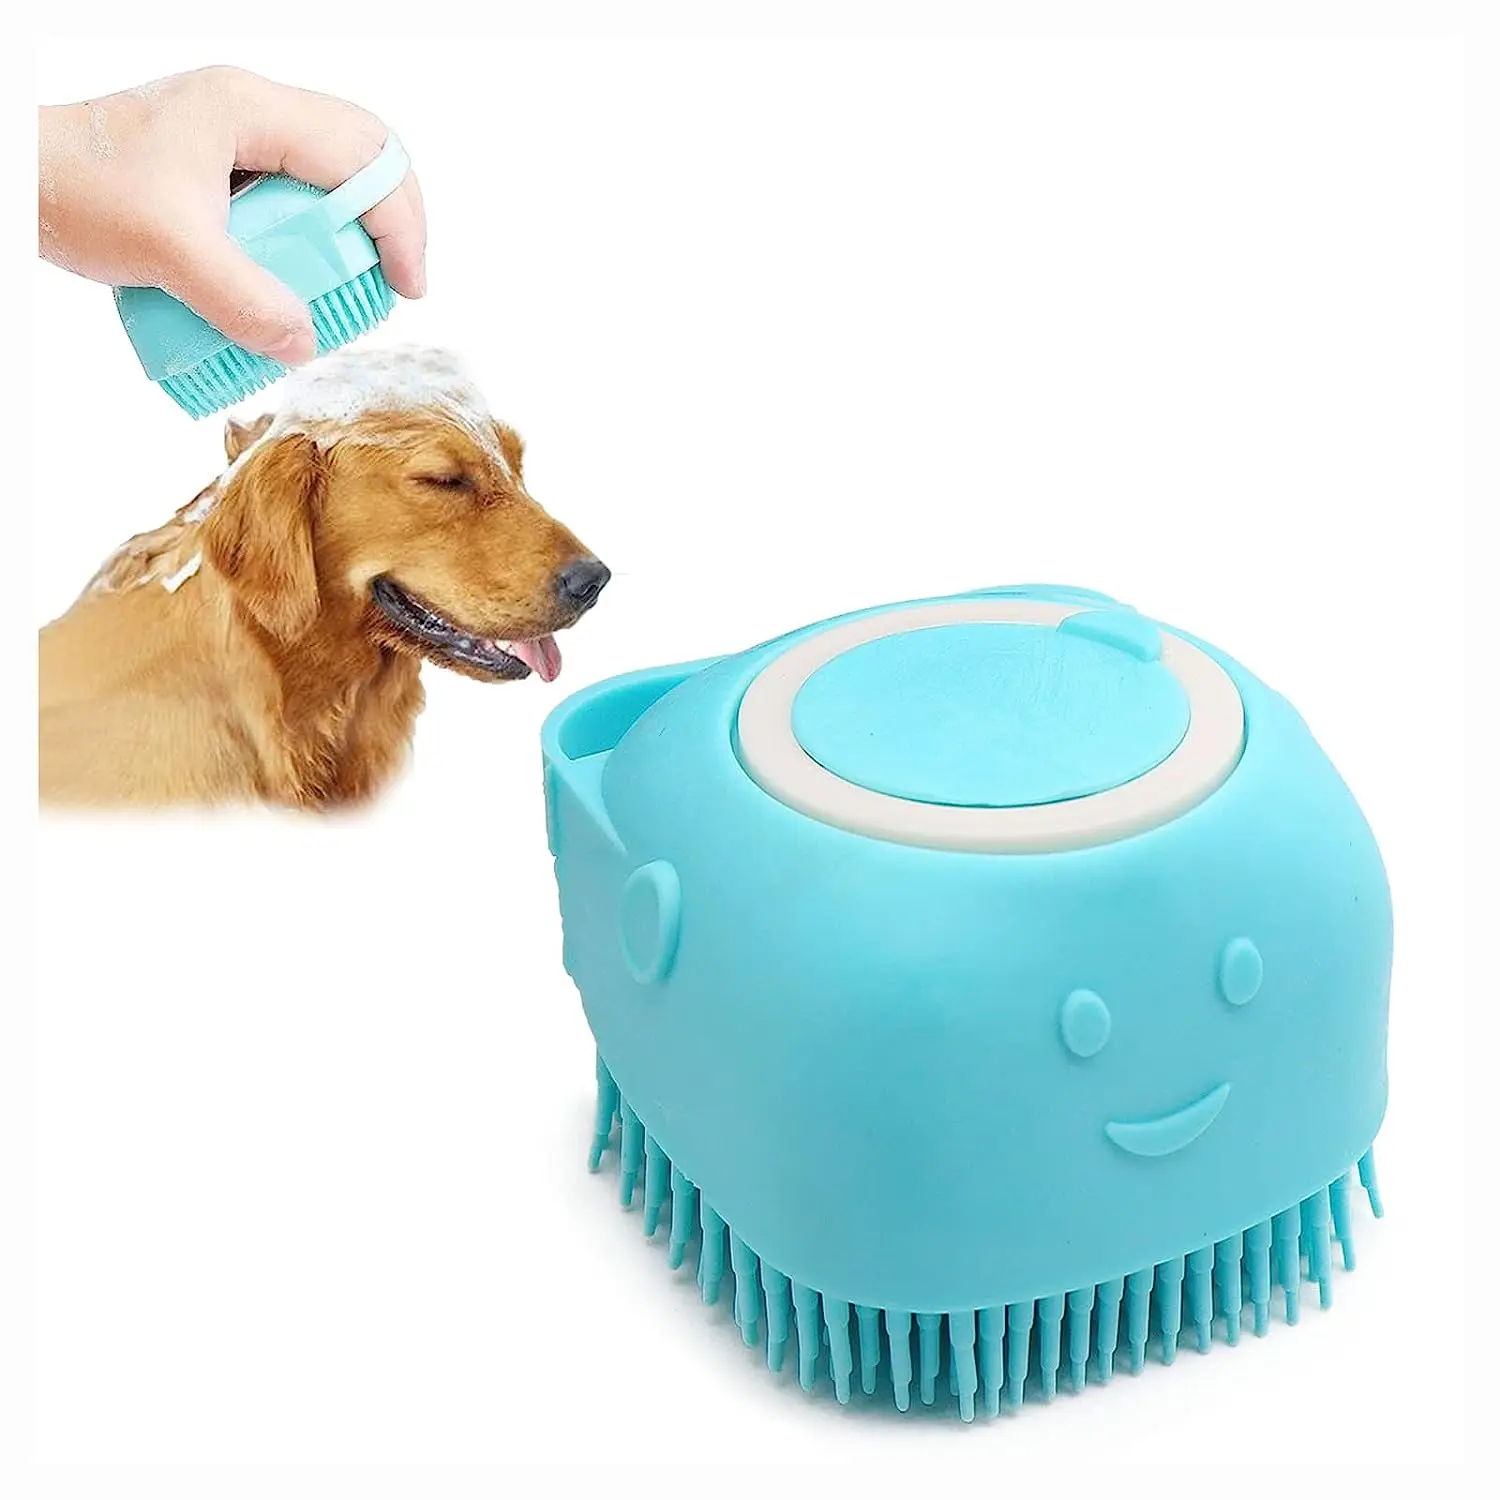 

Dog Scrubber for Bath Pet Bathing Brush Silicone Shampoo Massage Dispenser Brush for Short Long Haired Dogs and Cats Washing